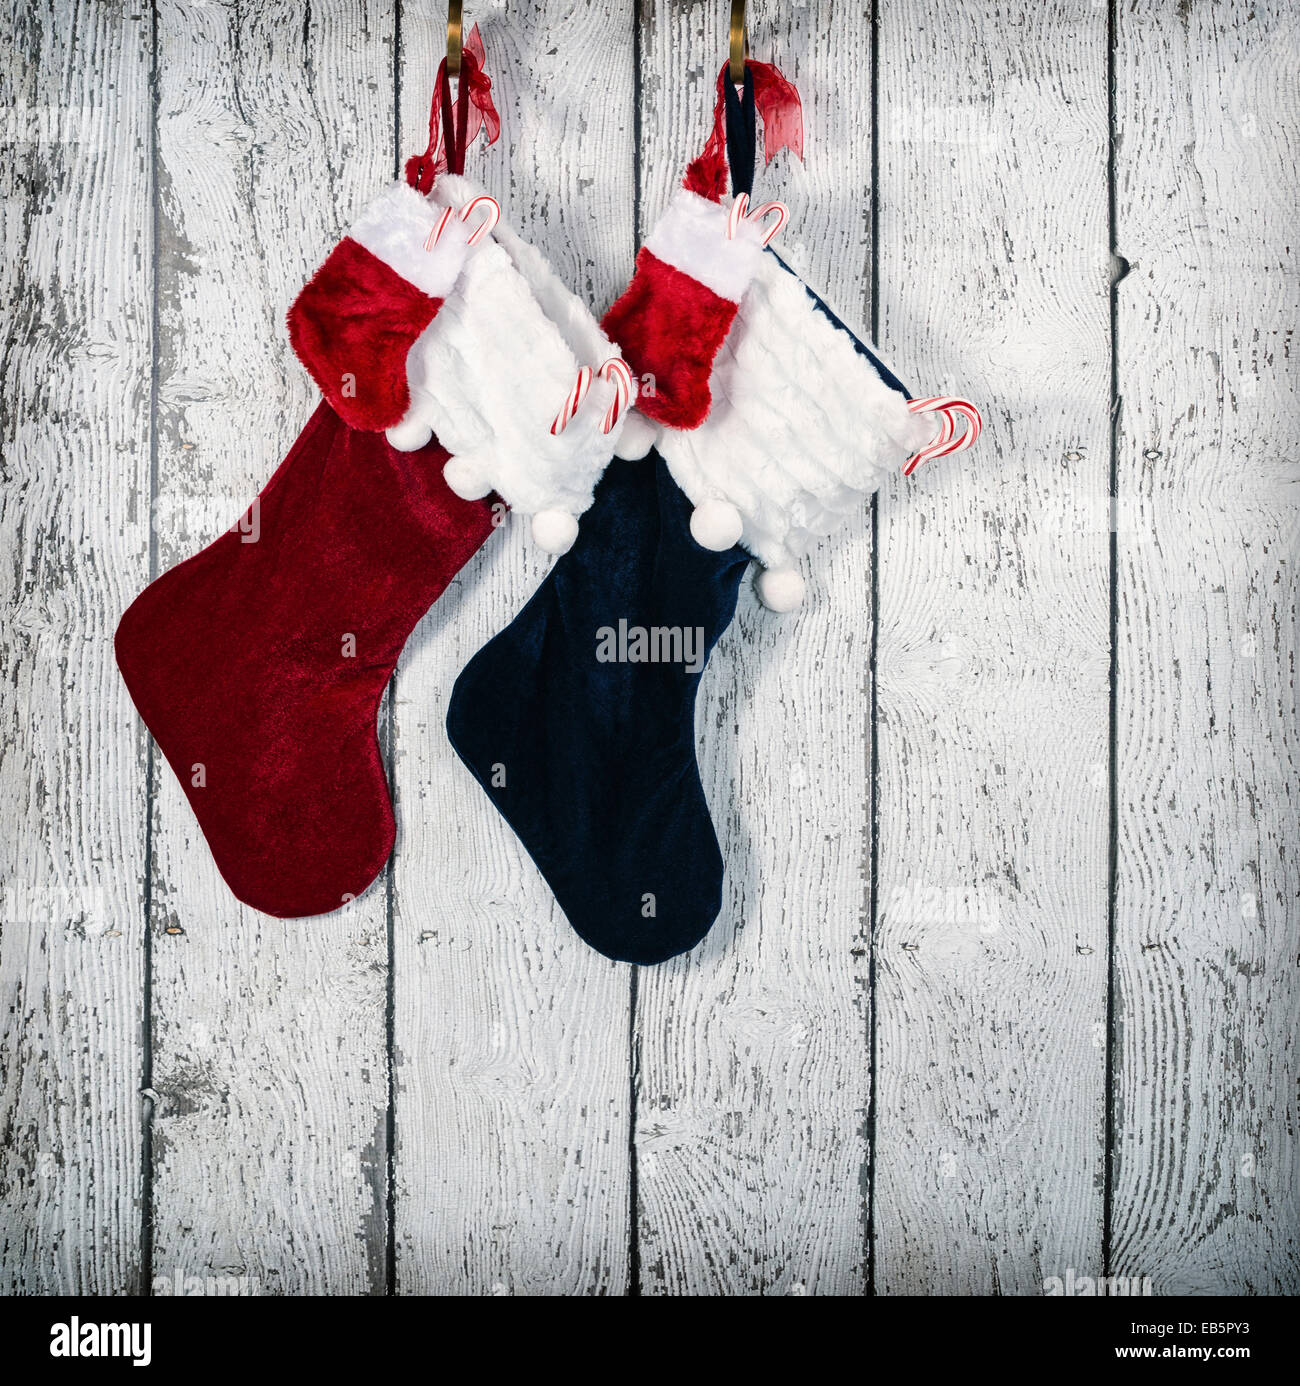 Christmas stocking hanging against rustic wood background Stock Photo